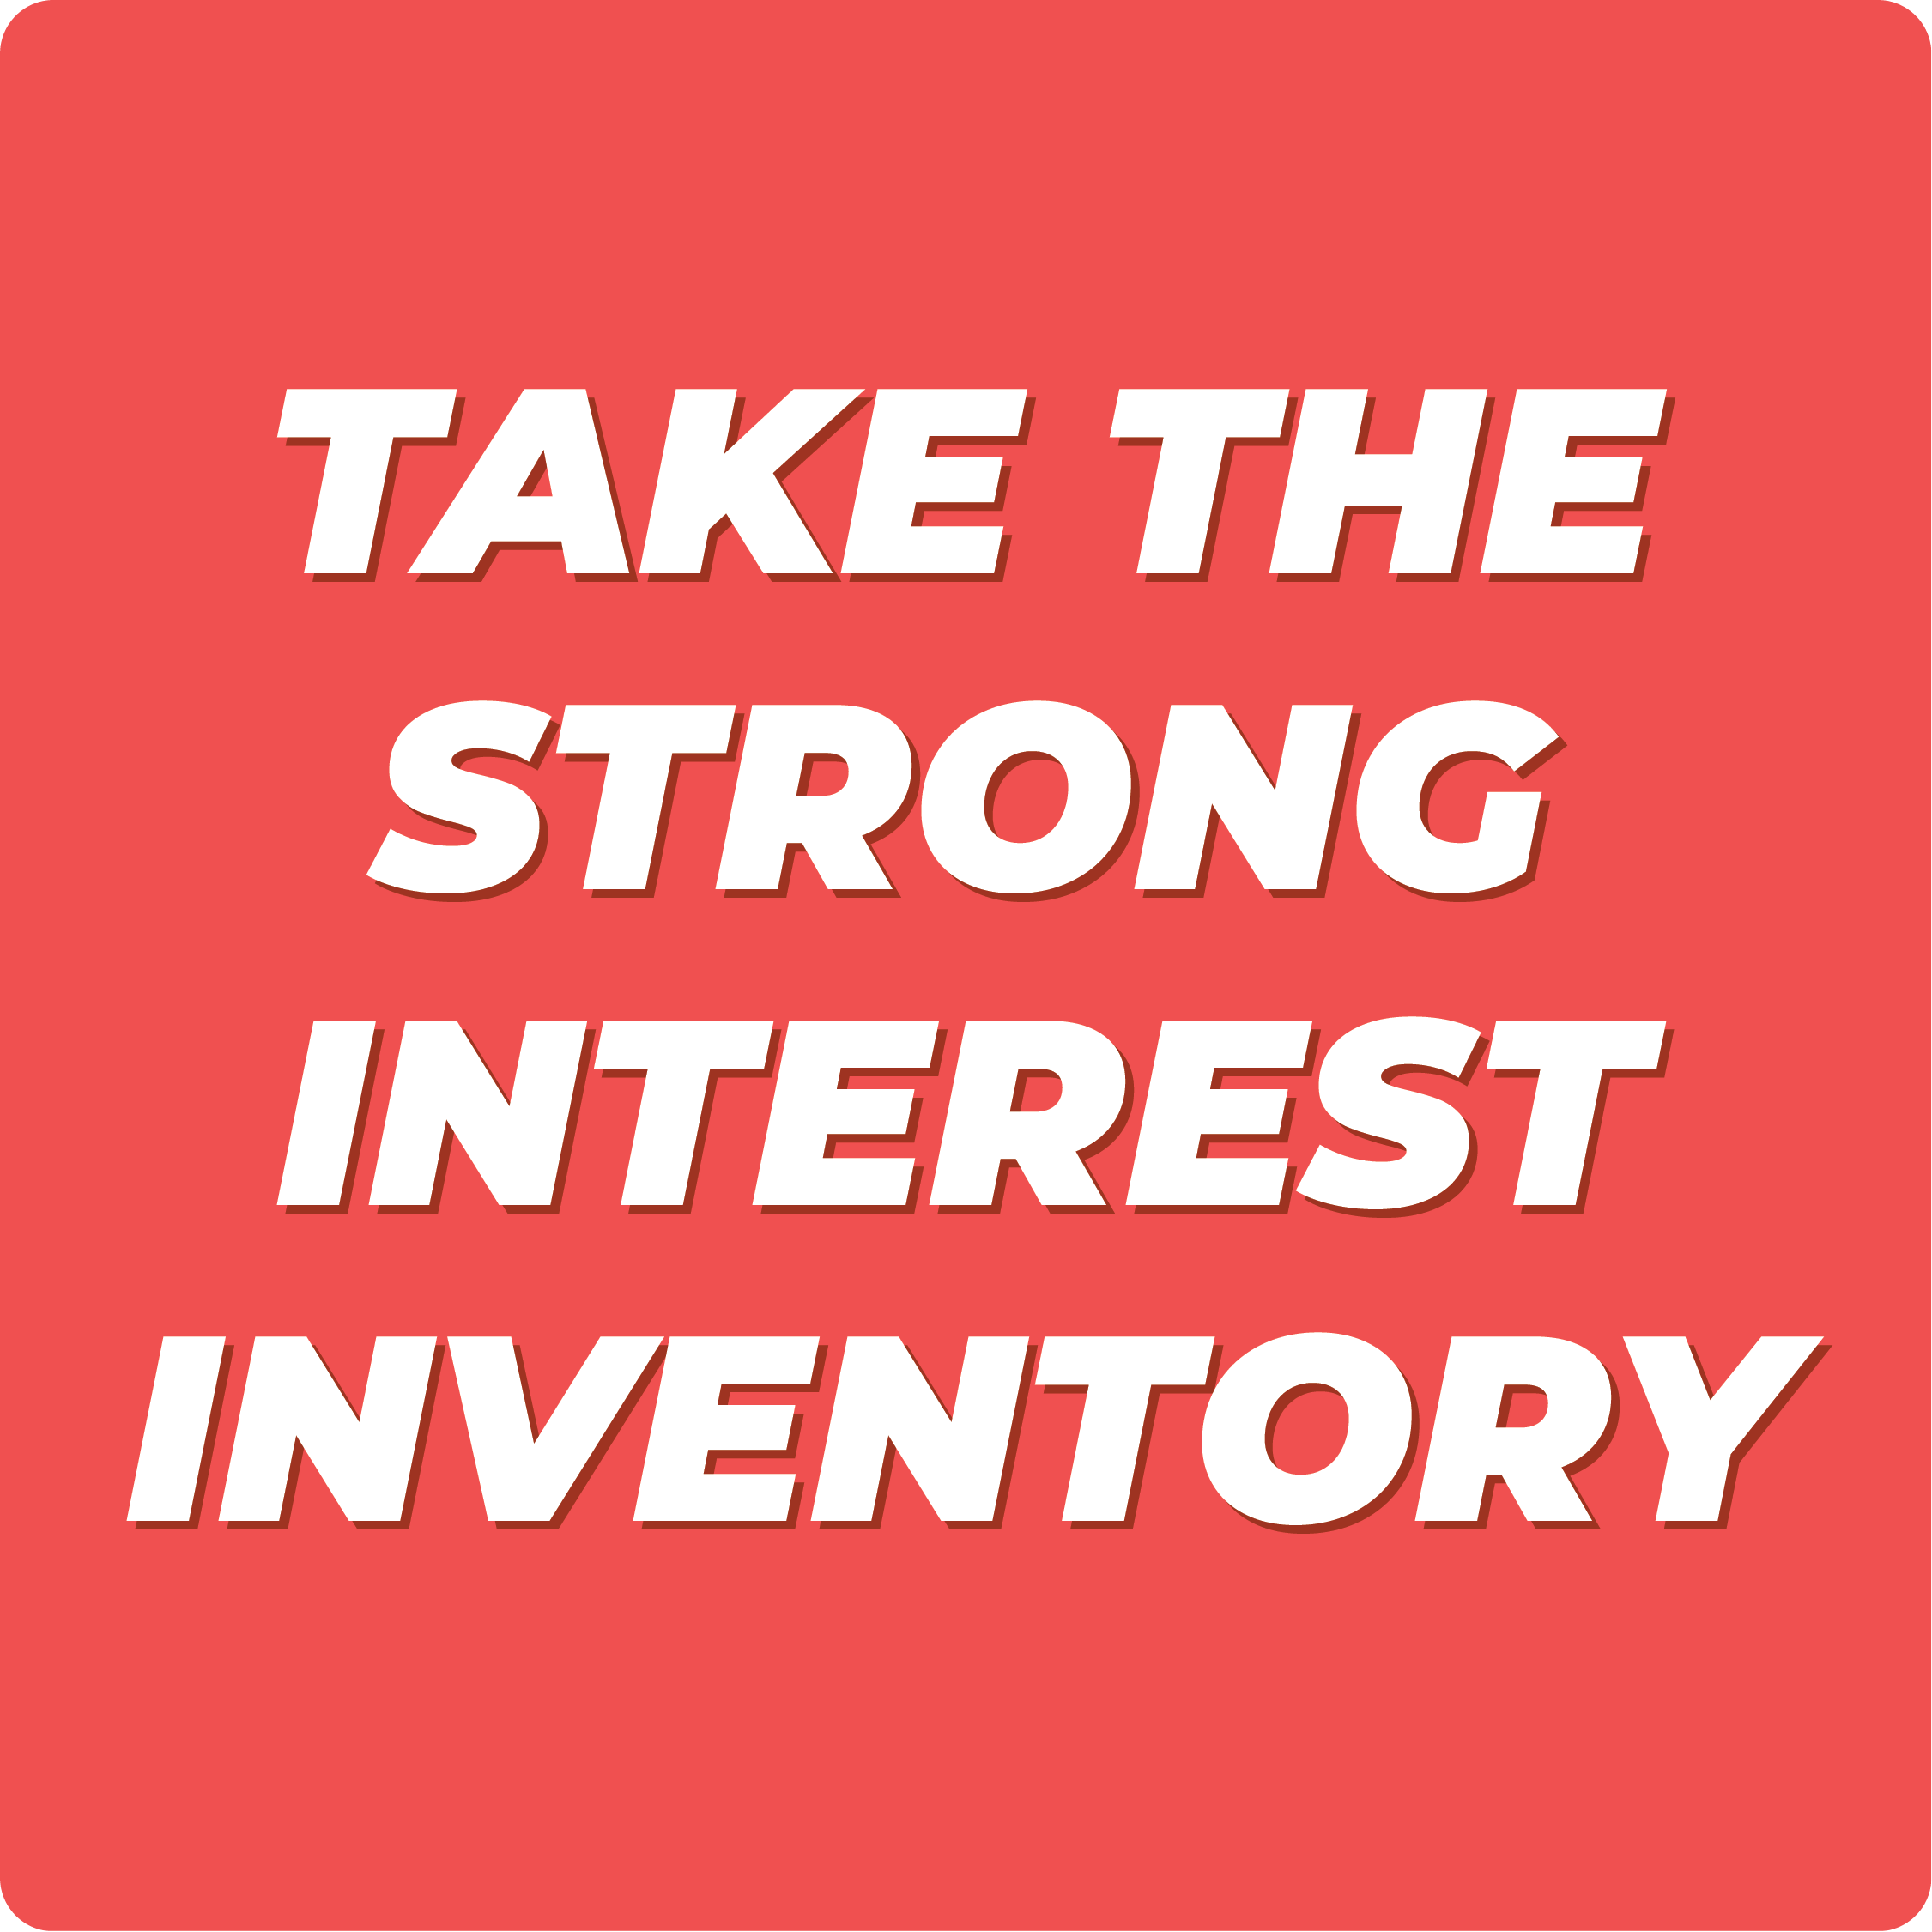 Strong Interest Inventory